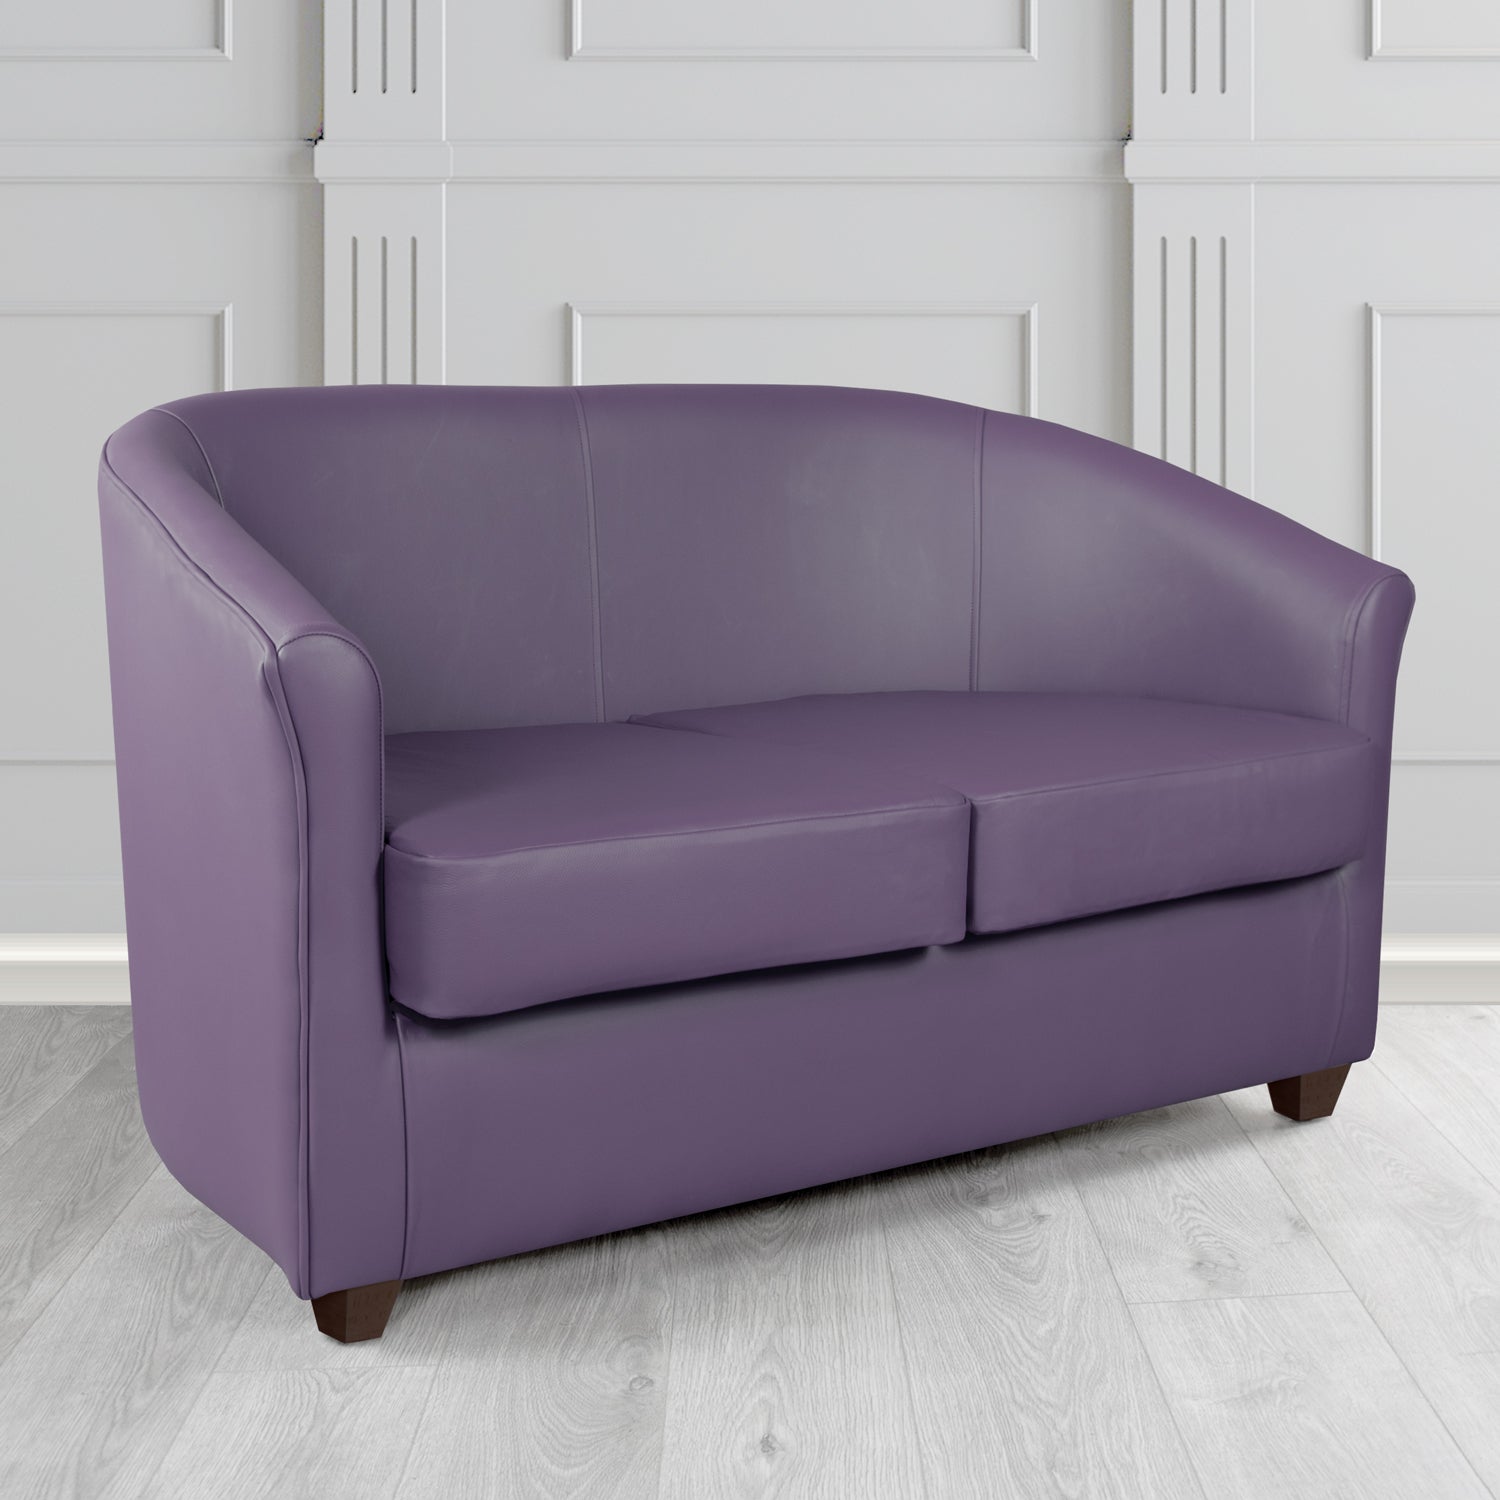 Cannes 2 Seater Tub Sofa in Just Colour Professor Plum Crib 5 Faux Leather - The Tub Chair Shop